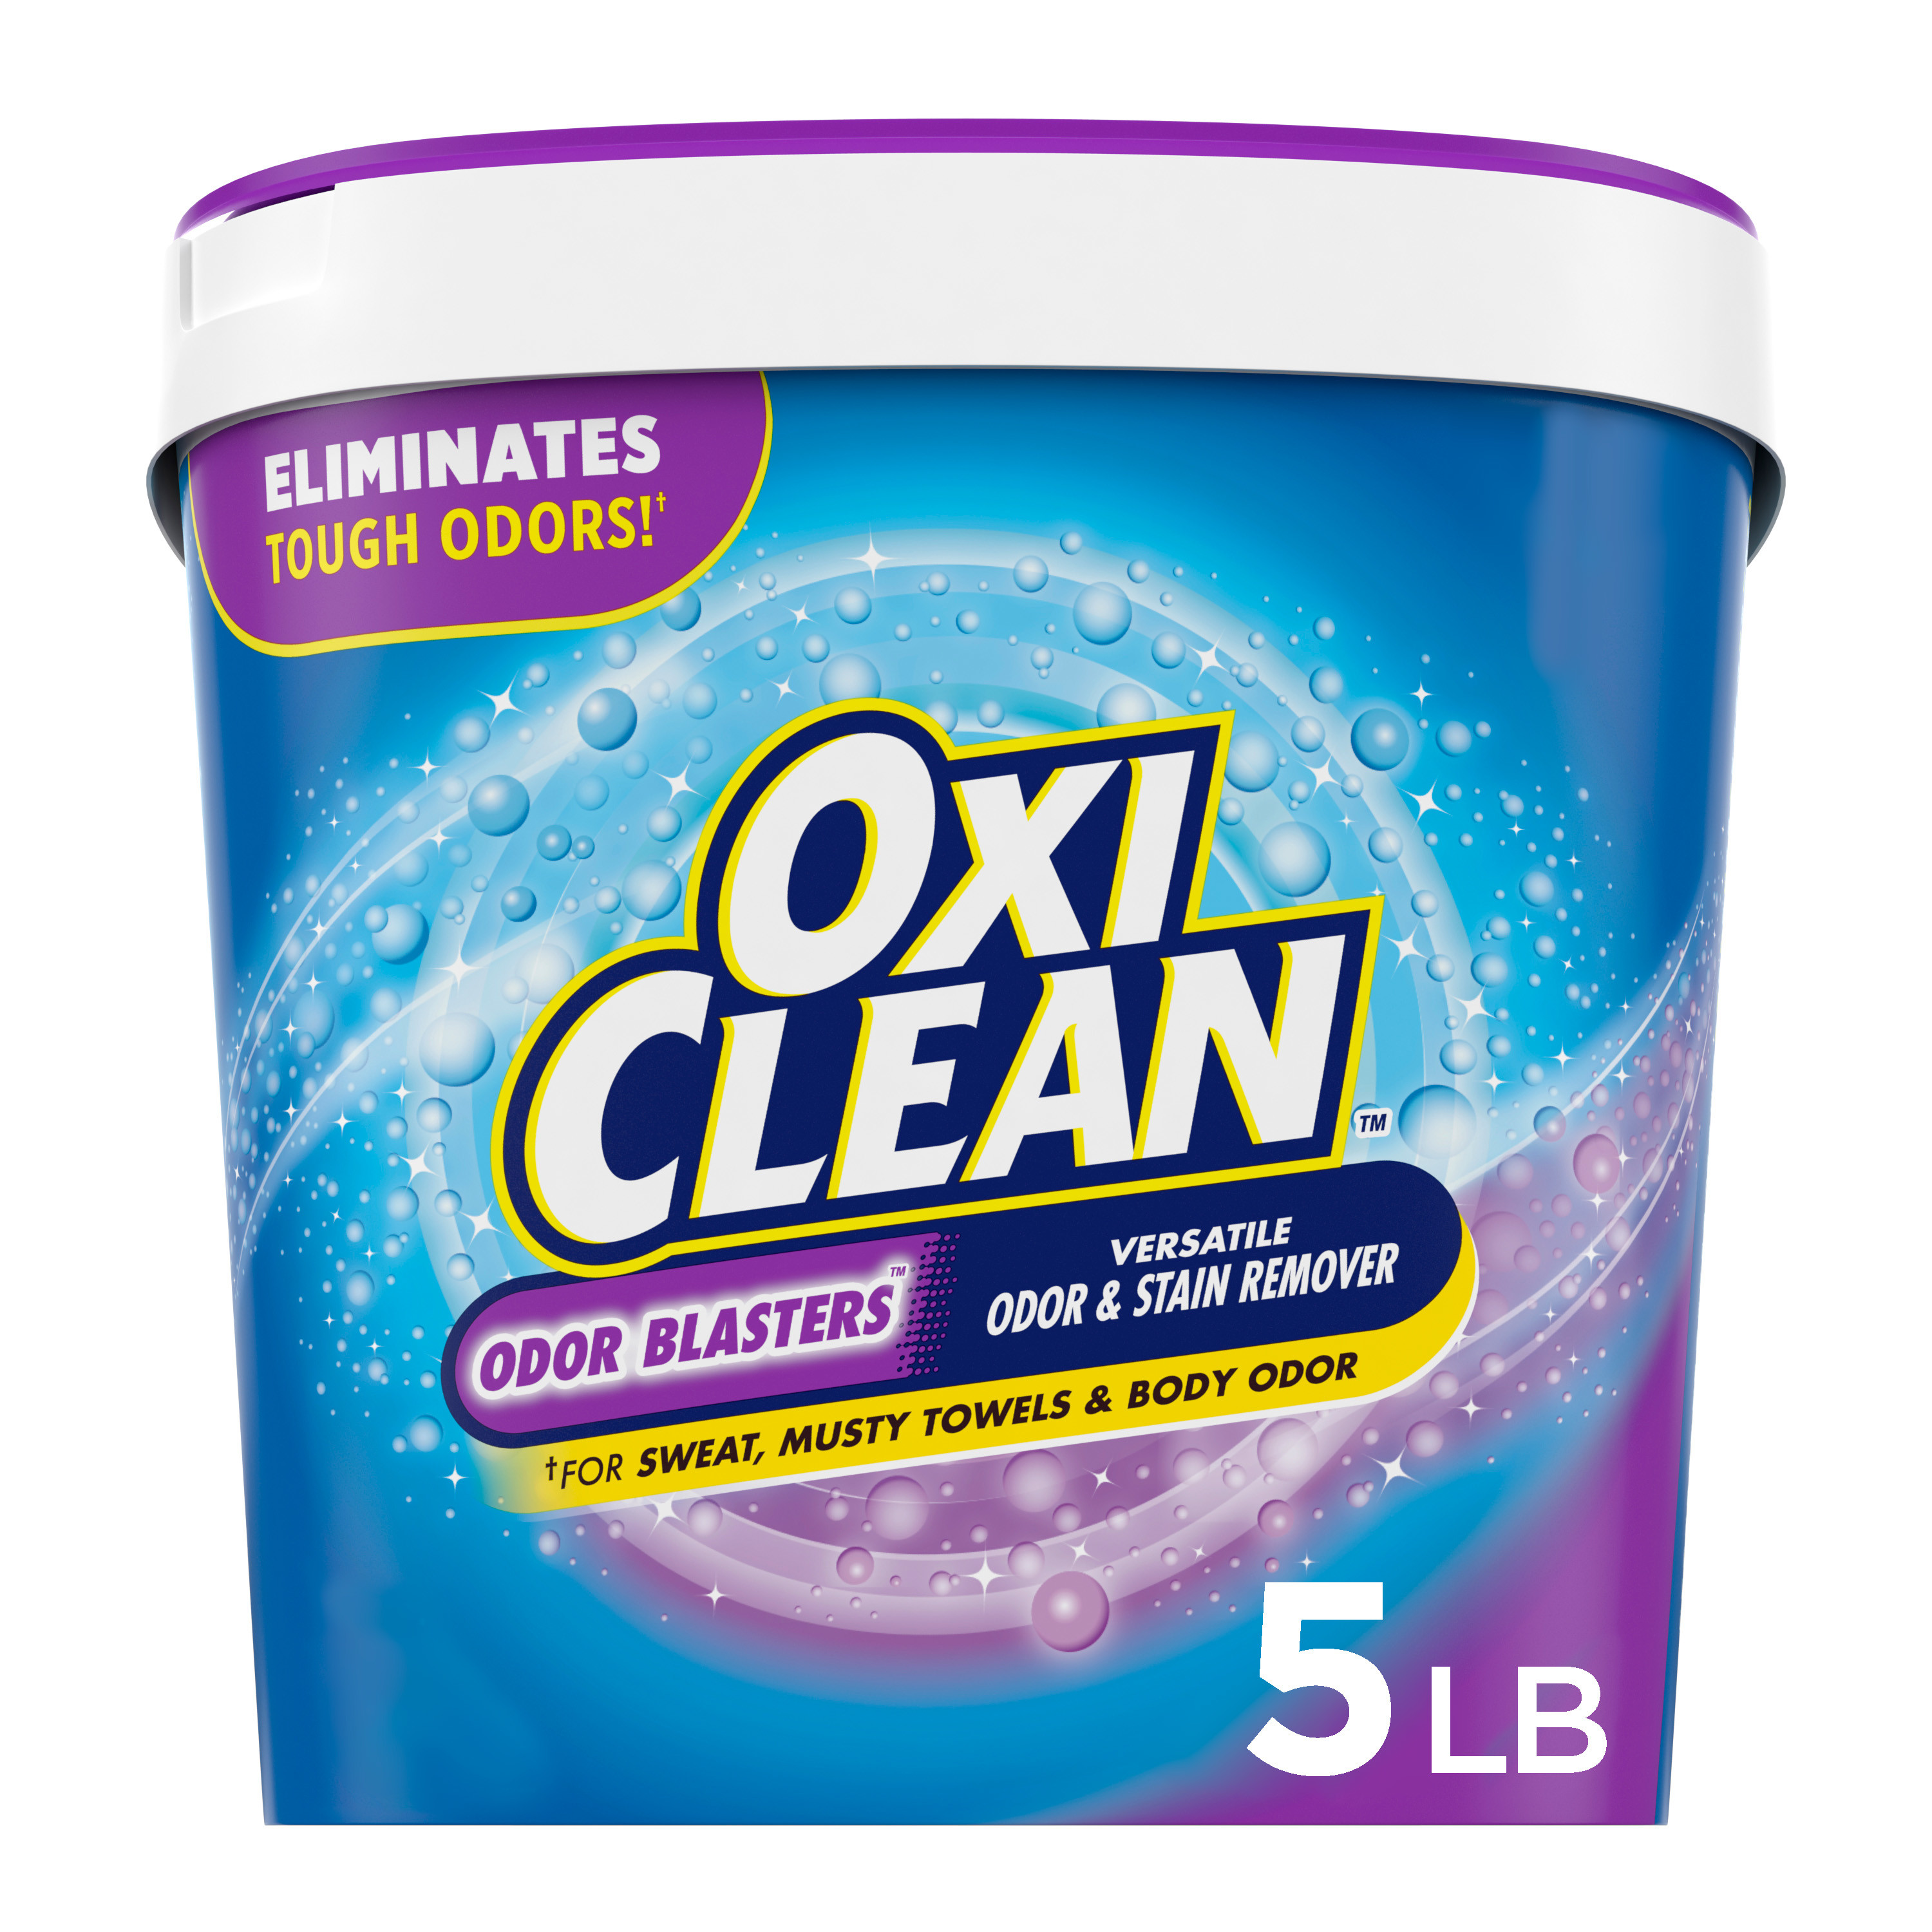 OxiClean Odor Blasters Versatile Odor and Stain Remover Powder, 5 lb - image 1 of 9